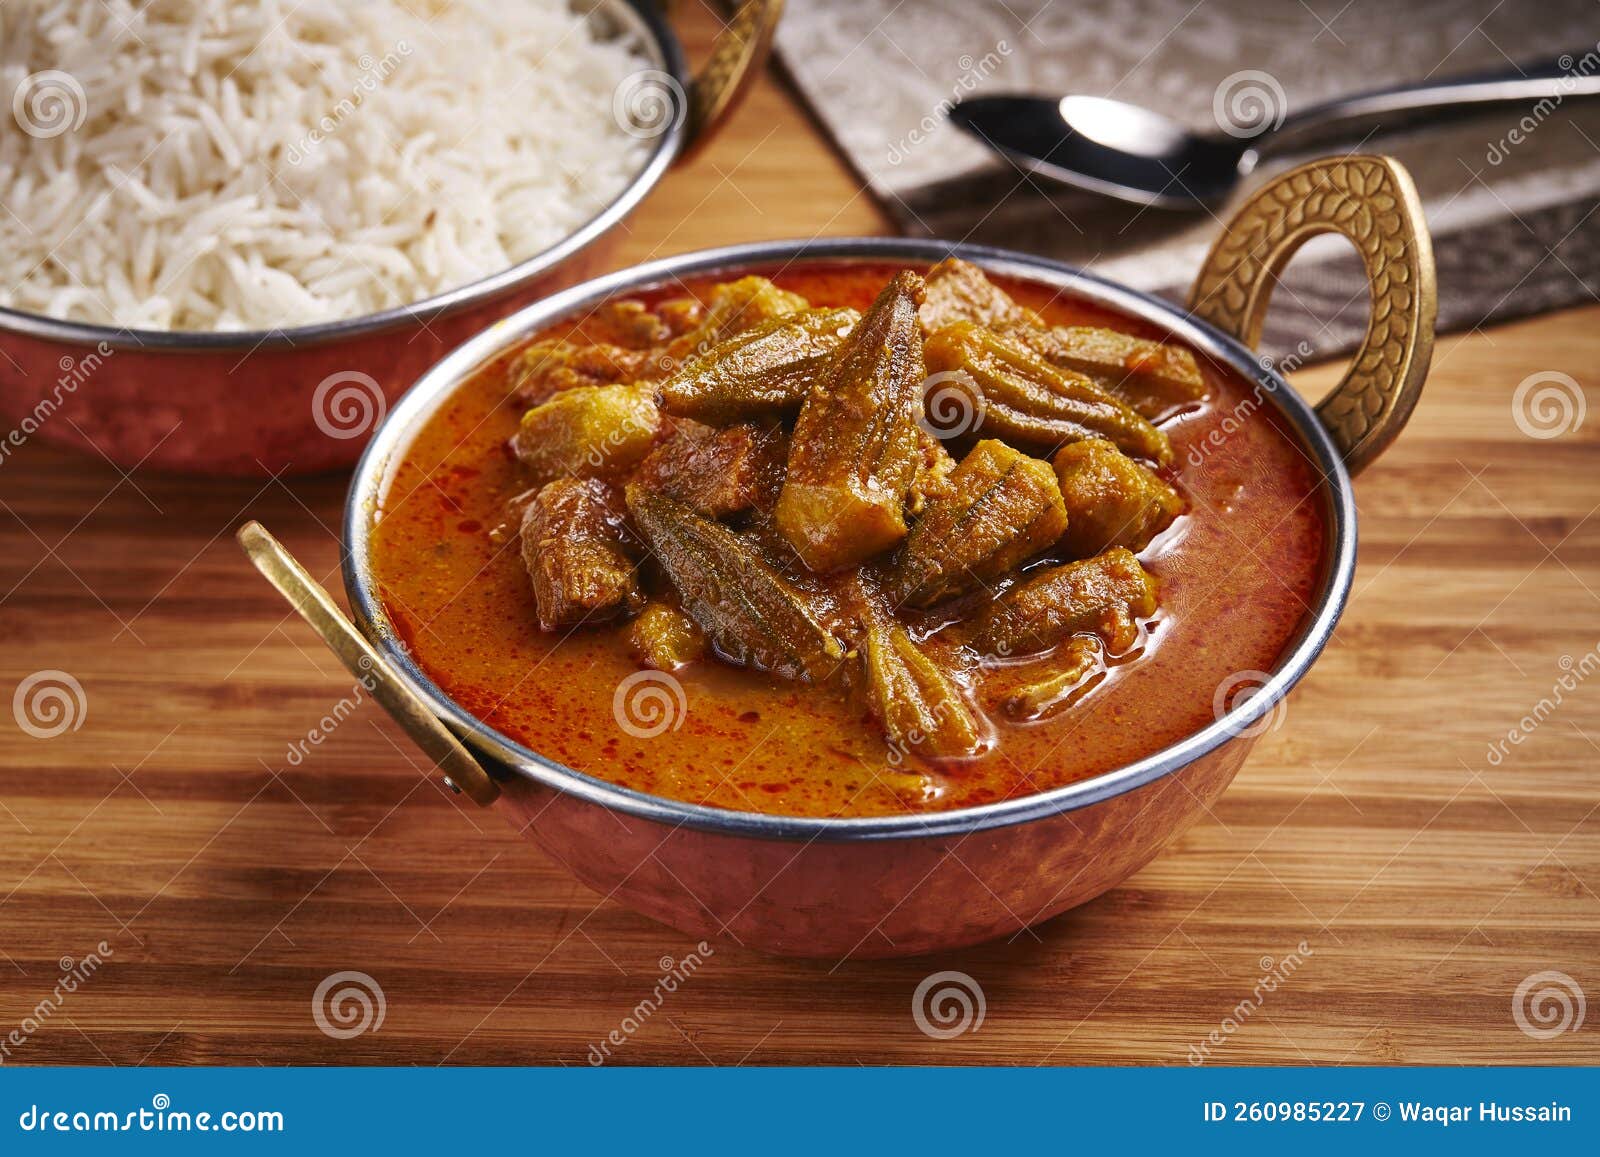 okra stew with white rice khoresht bamia or lady finger curry served in dish  on table side view of middle east food